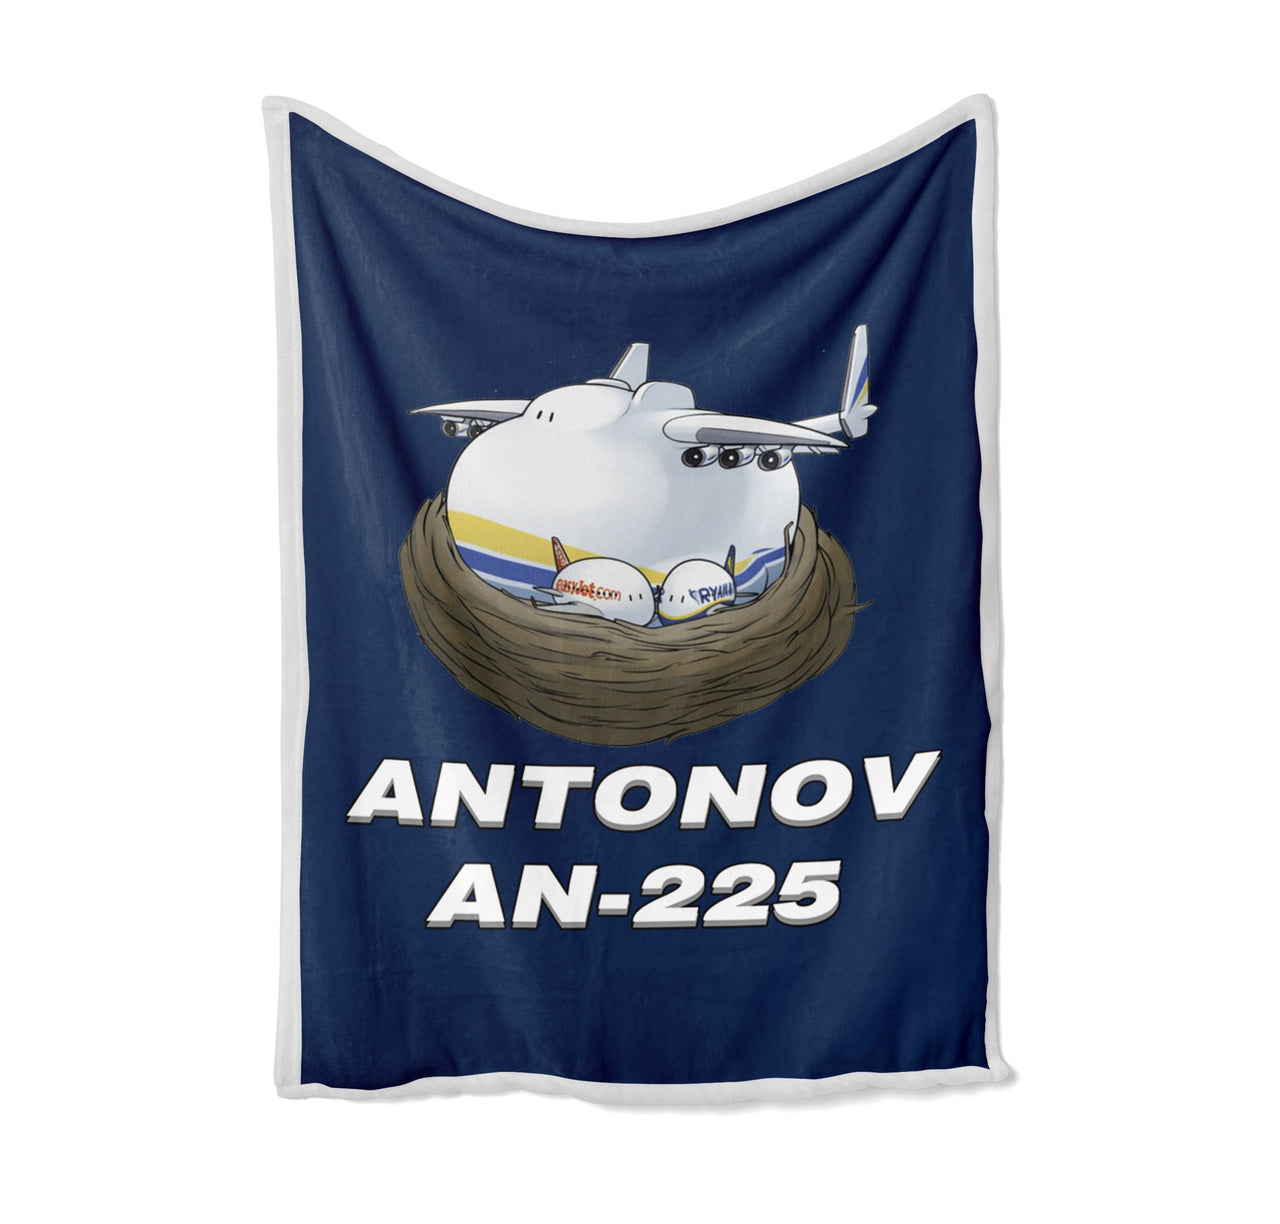 Antonov AN-225 (22) Designed Bed Blankets & Covers